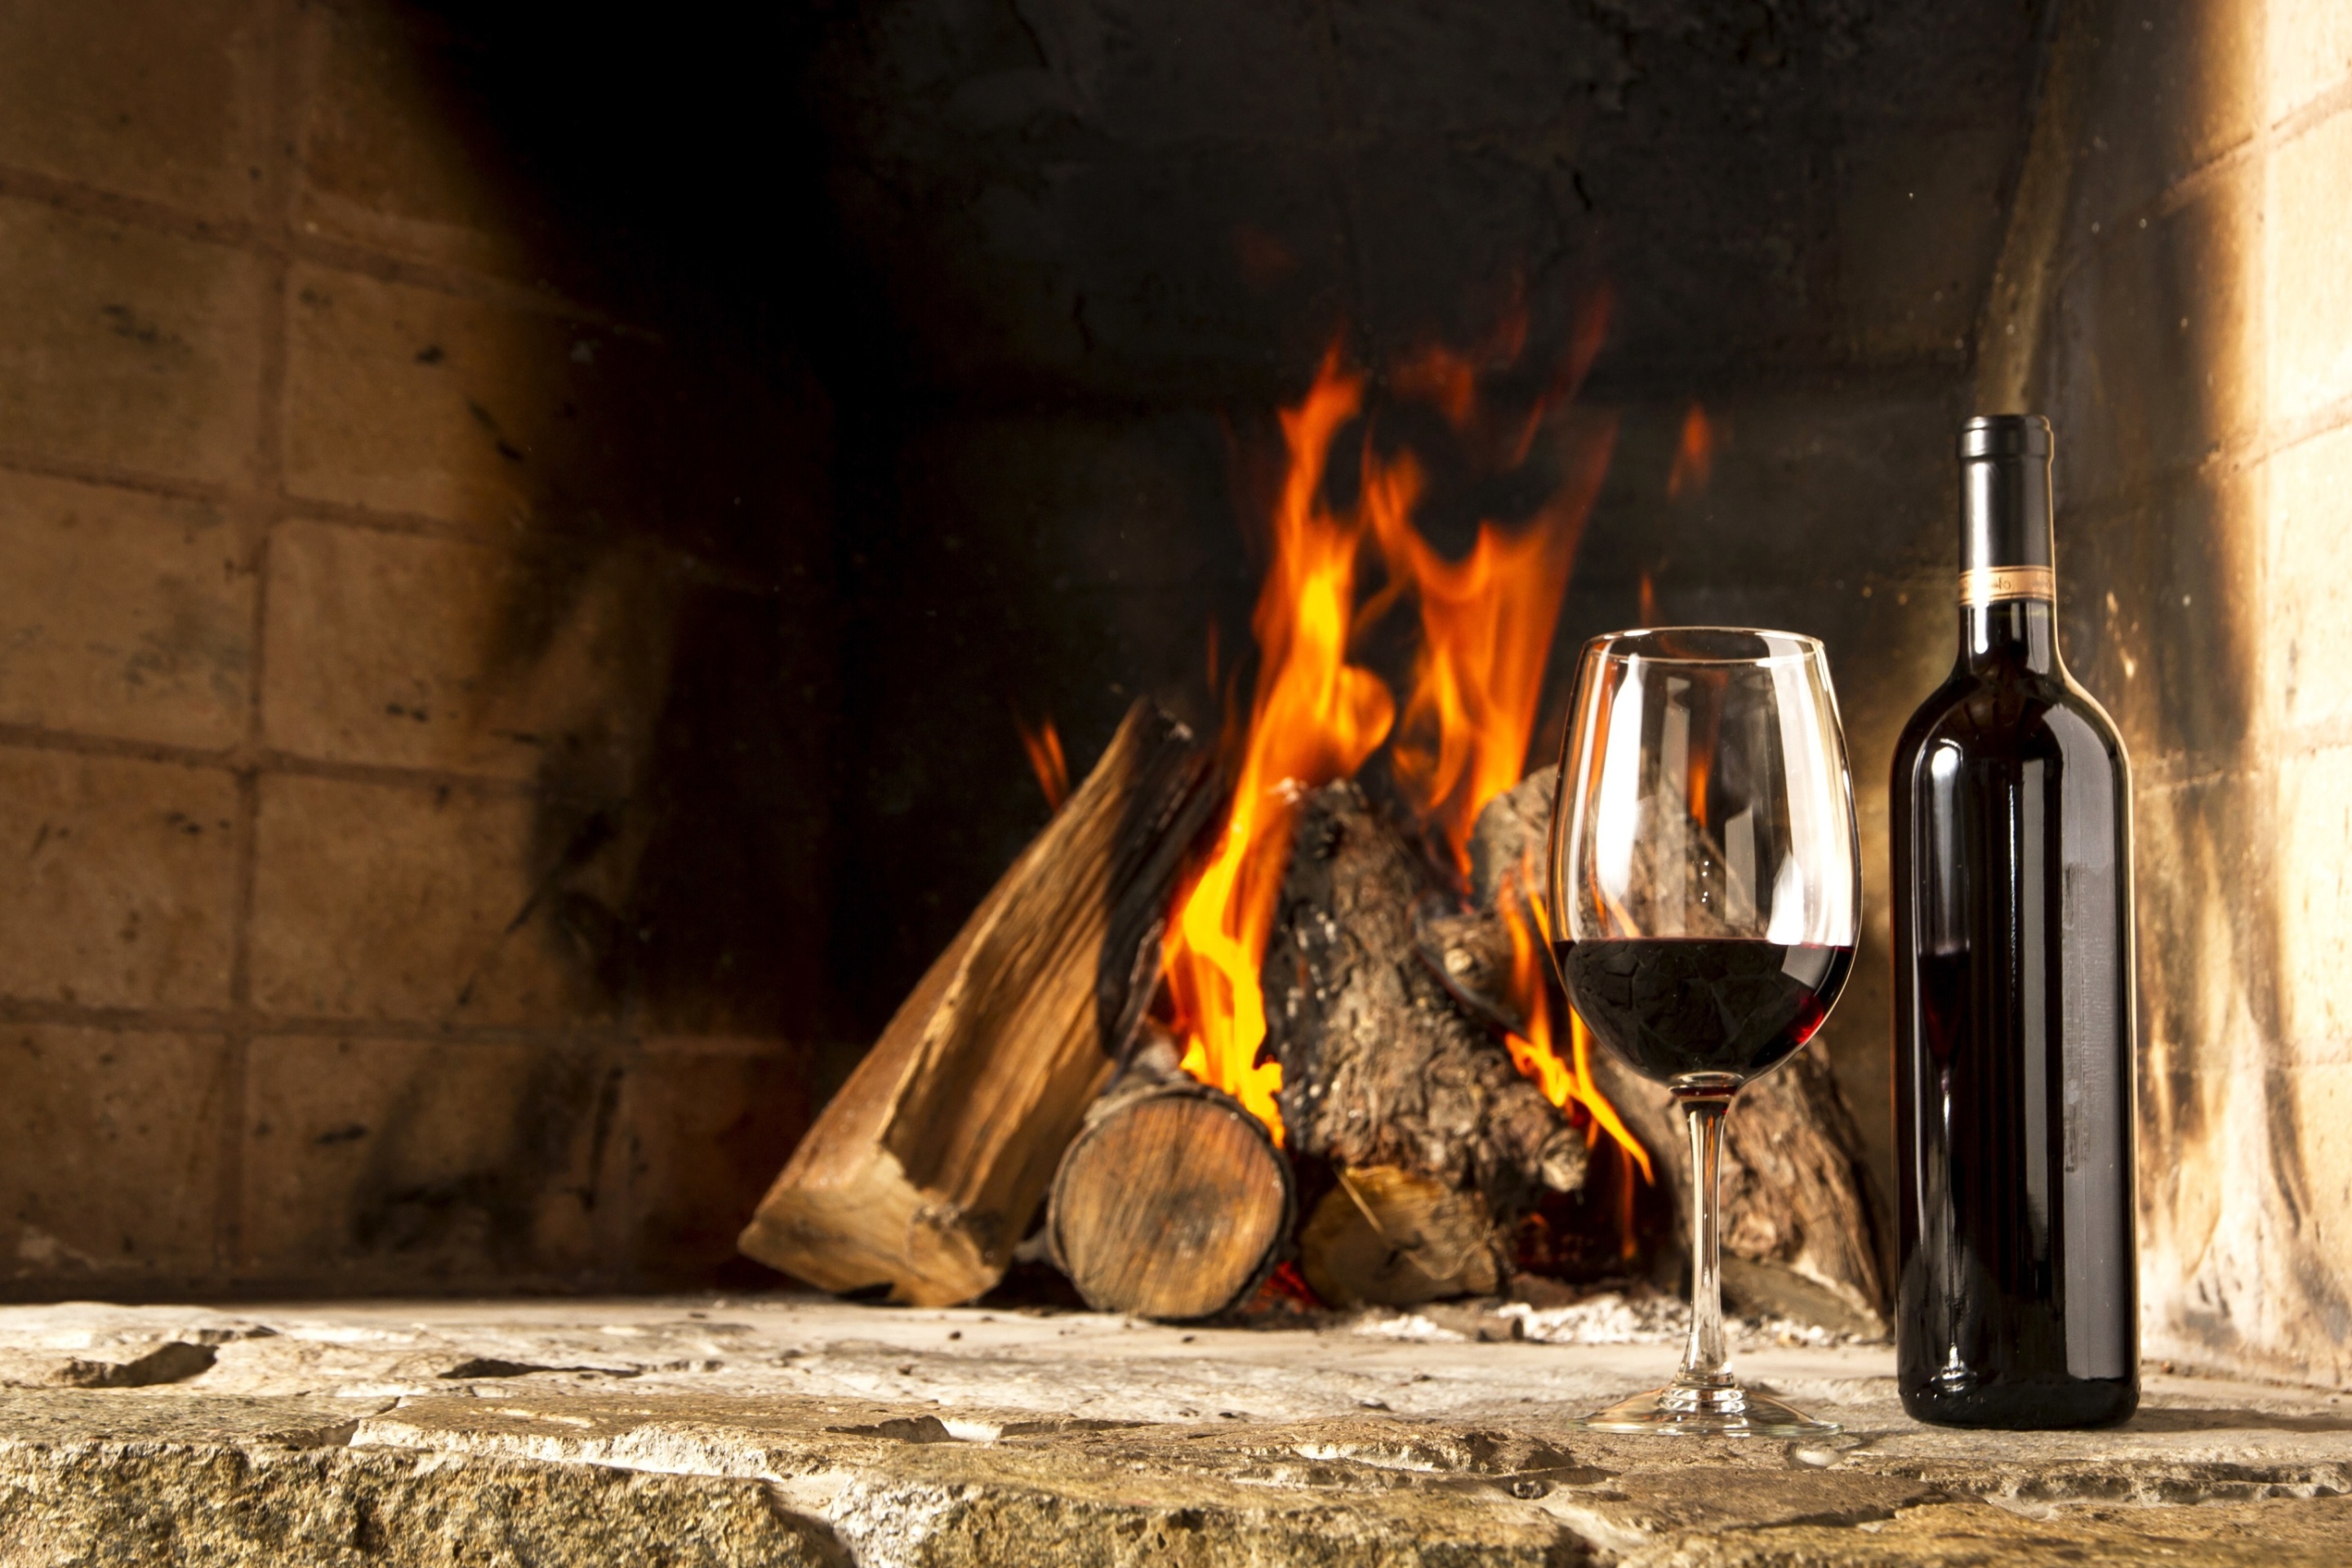 Wine and fireplace wallpaper 2880x1920